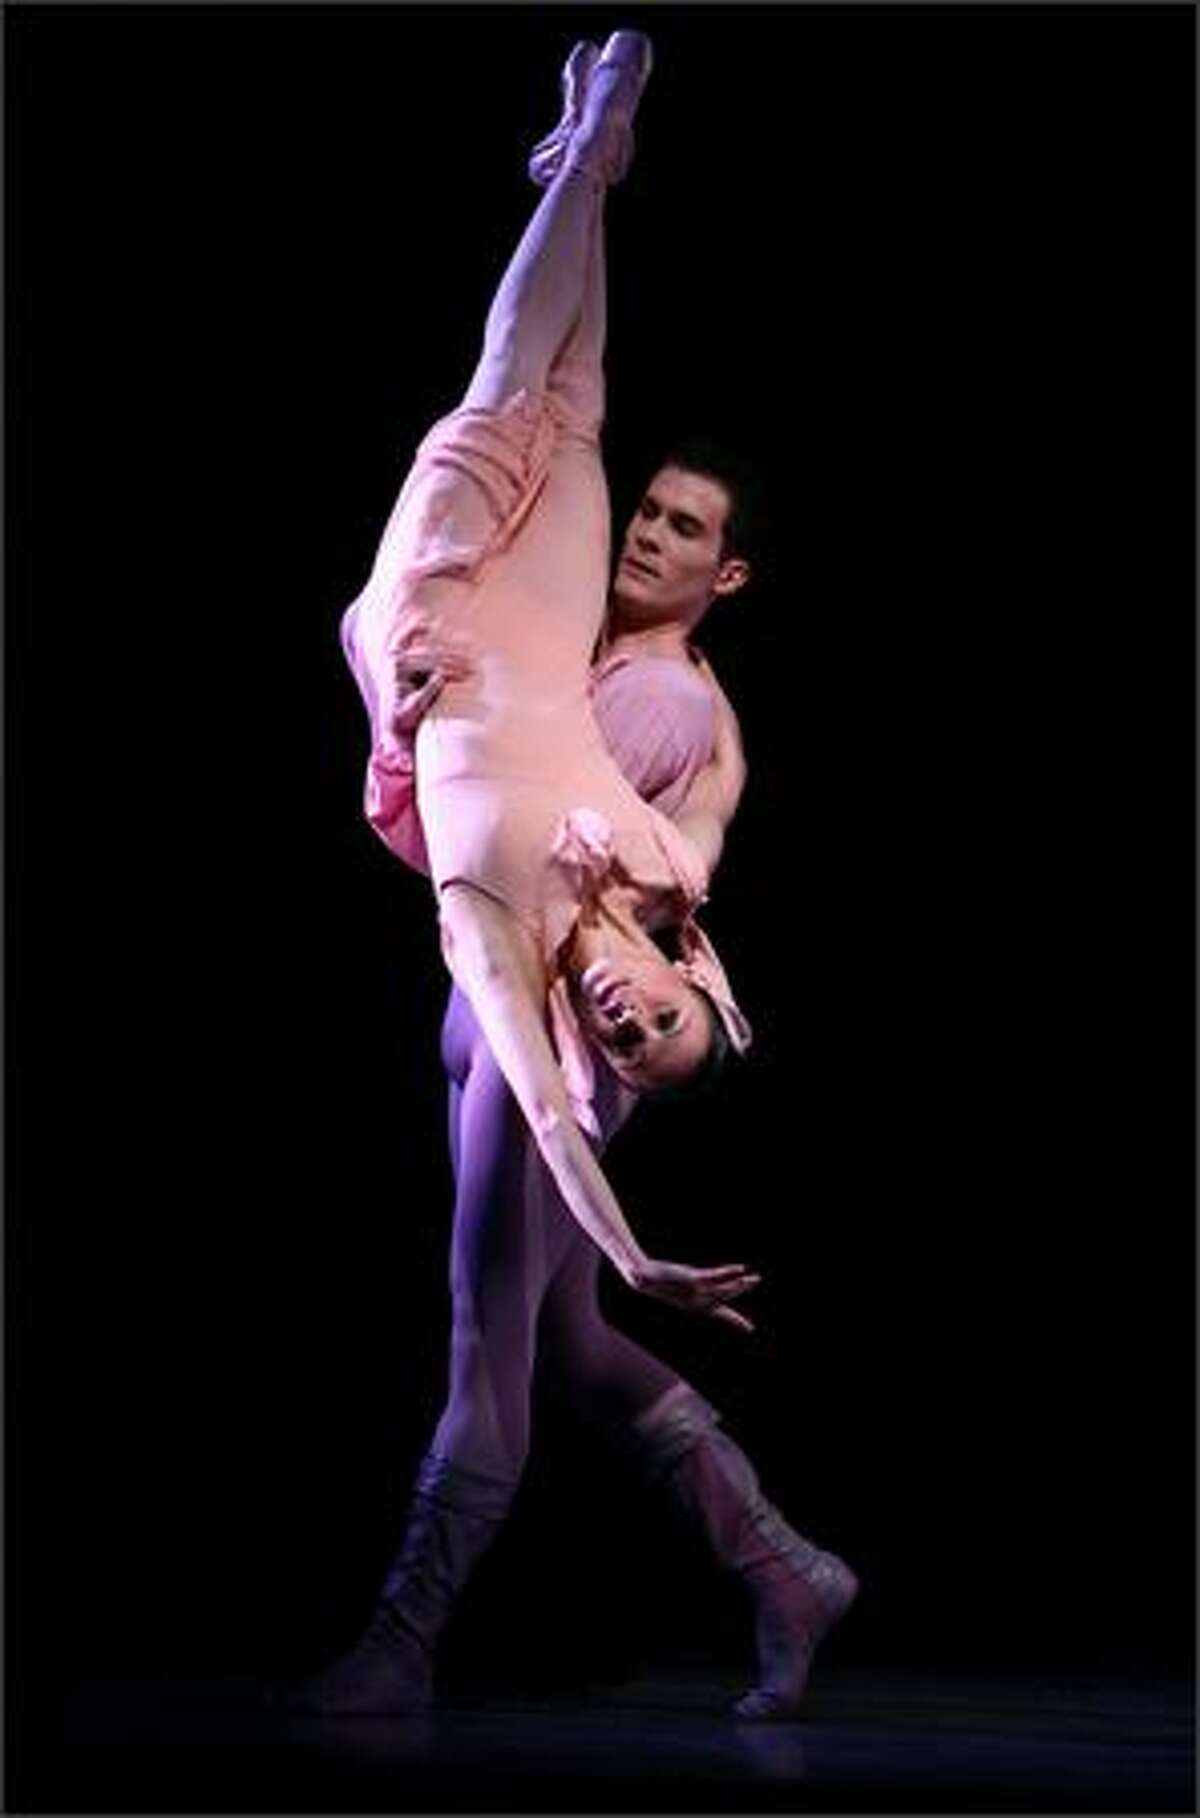 Principal dancer Kaori Nakamura and soloist Seth Orza of Pacific Northwest Ballet perform Jerome Robbins' "Dances at a Gathering" during a dress rehearsal for the final program.